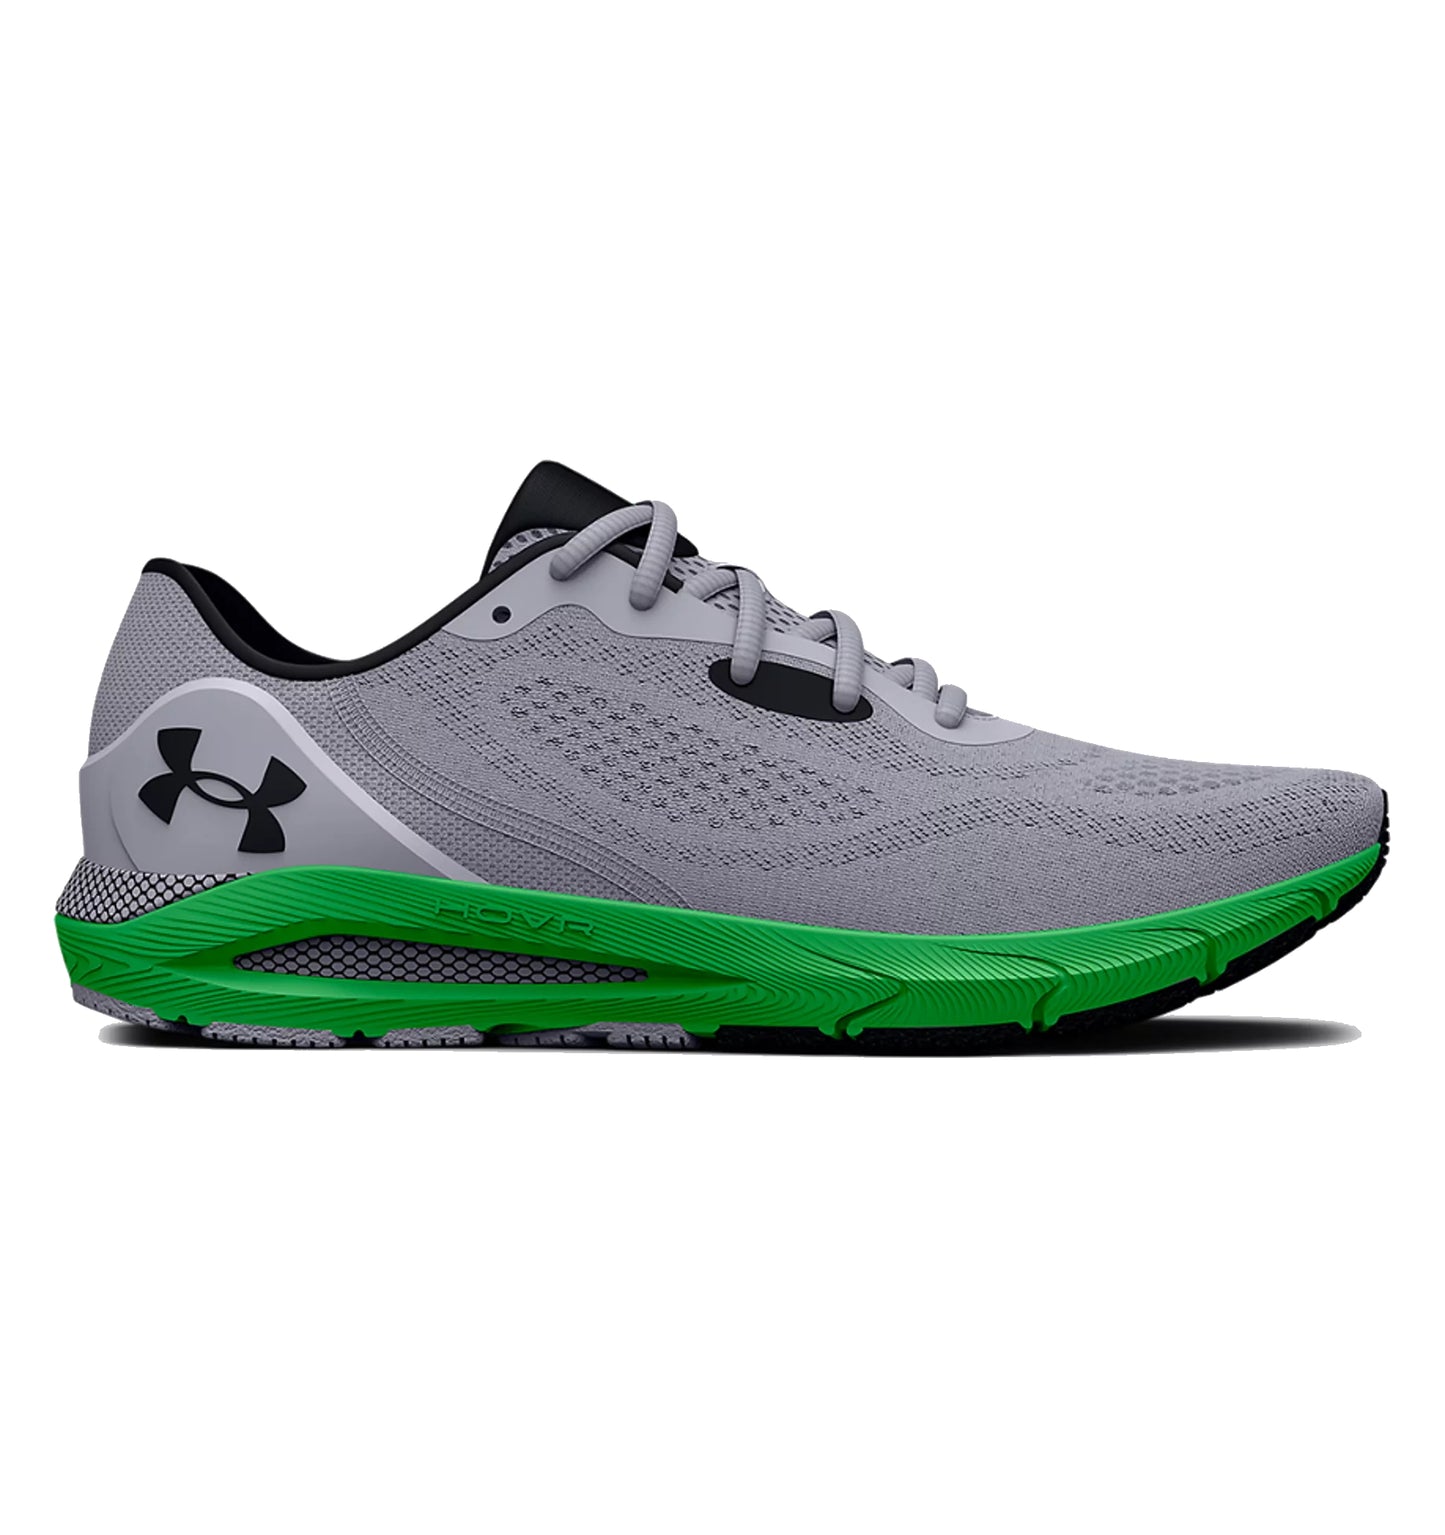 Under Armour Men's HOVR Sonic 5 Running Shoes Mod Gray/Black (On-Sale)